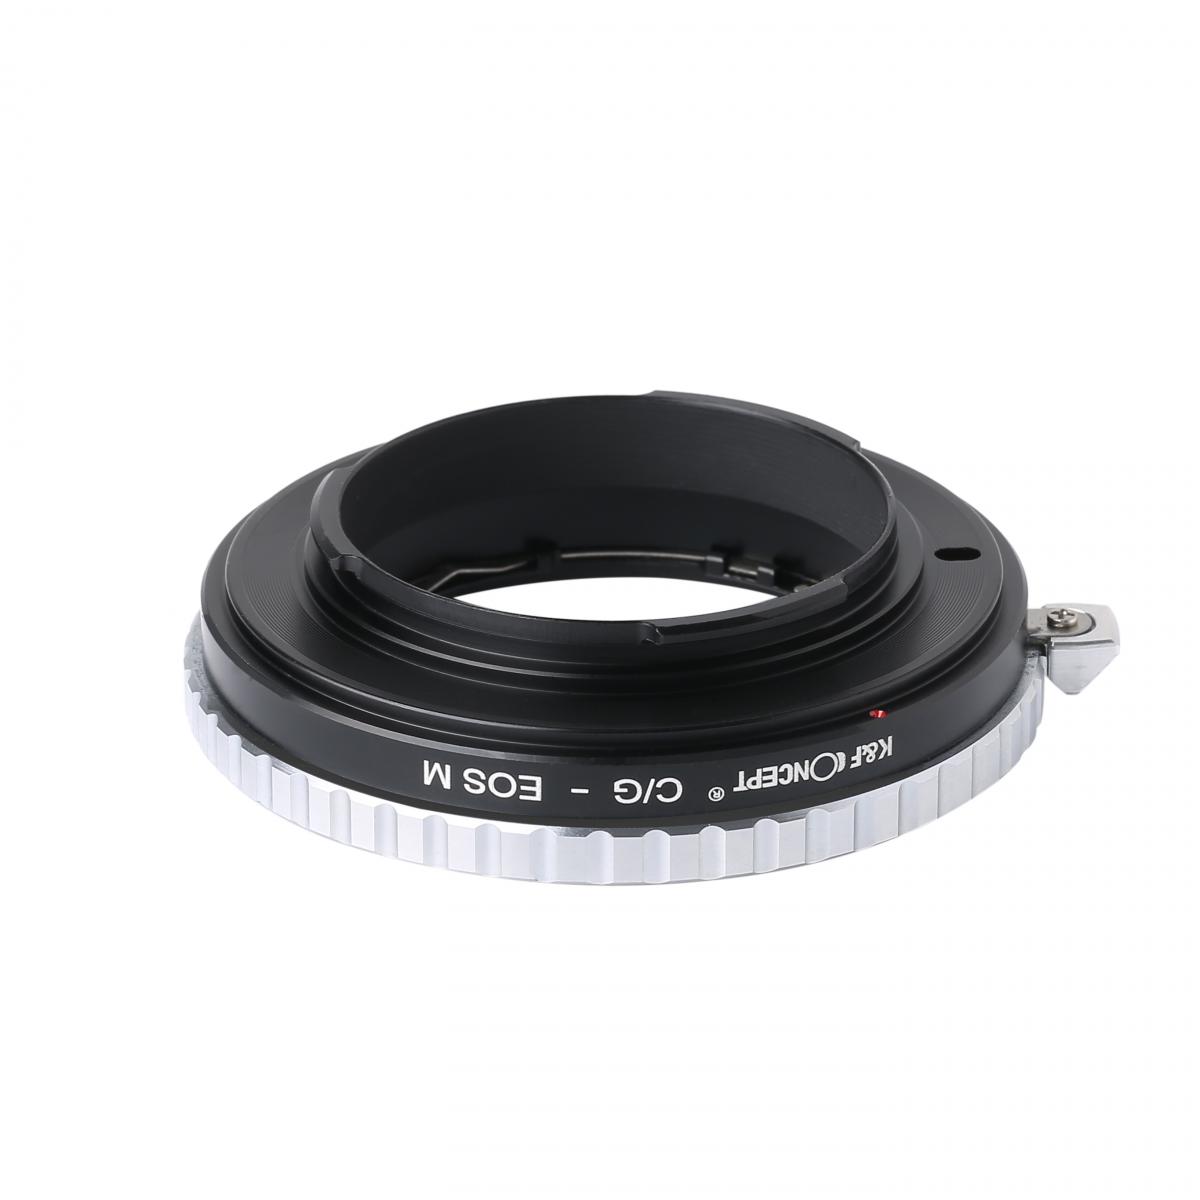 Contax G Lenses to Canon EOS M Lens Mount Adapter K&F Concept M26141 Lens Adapter